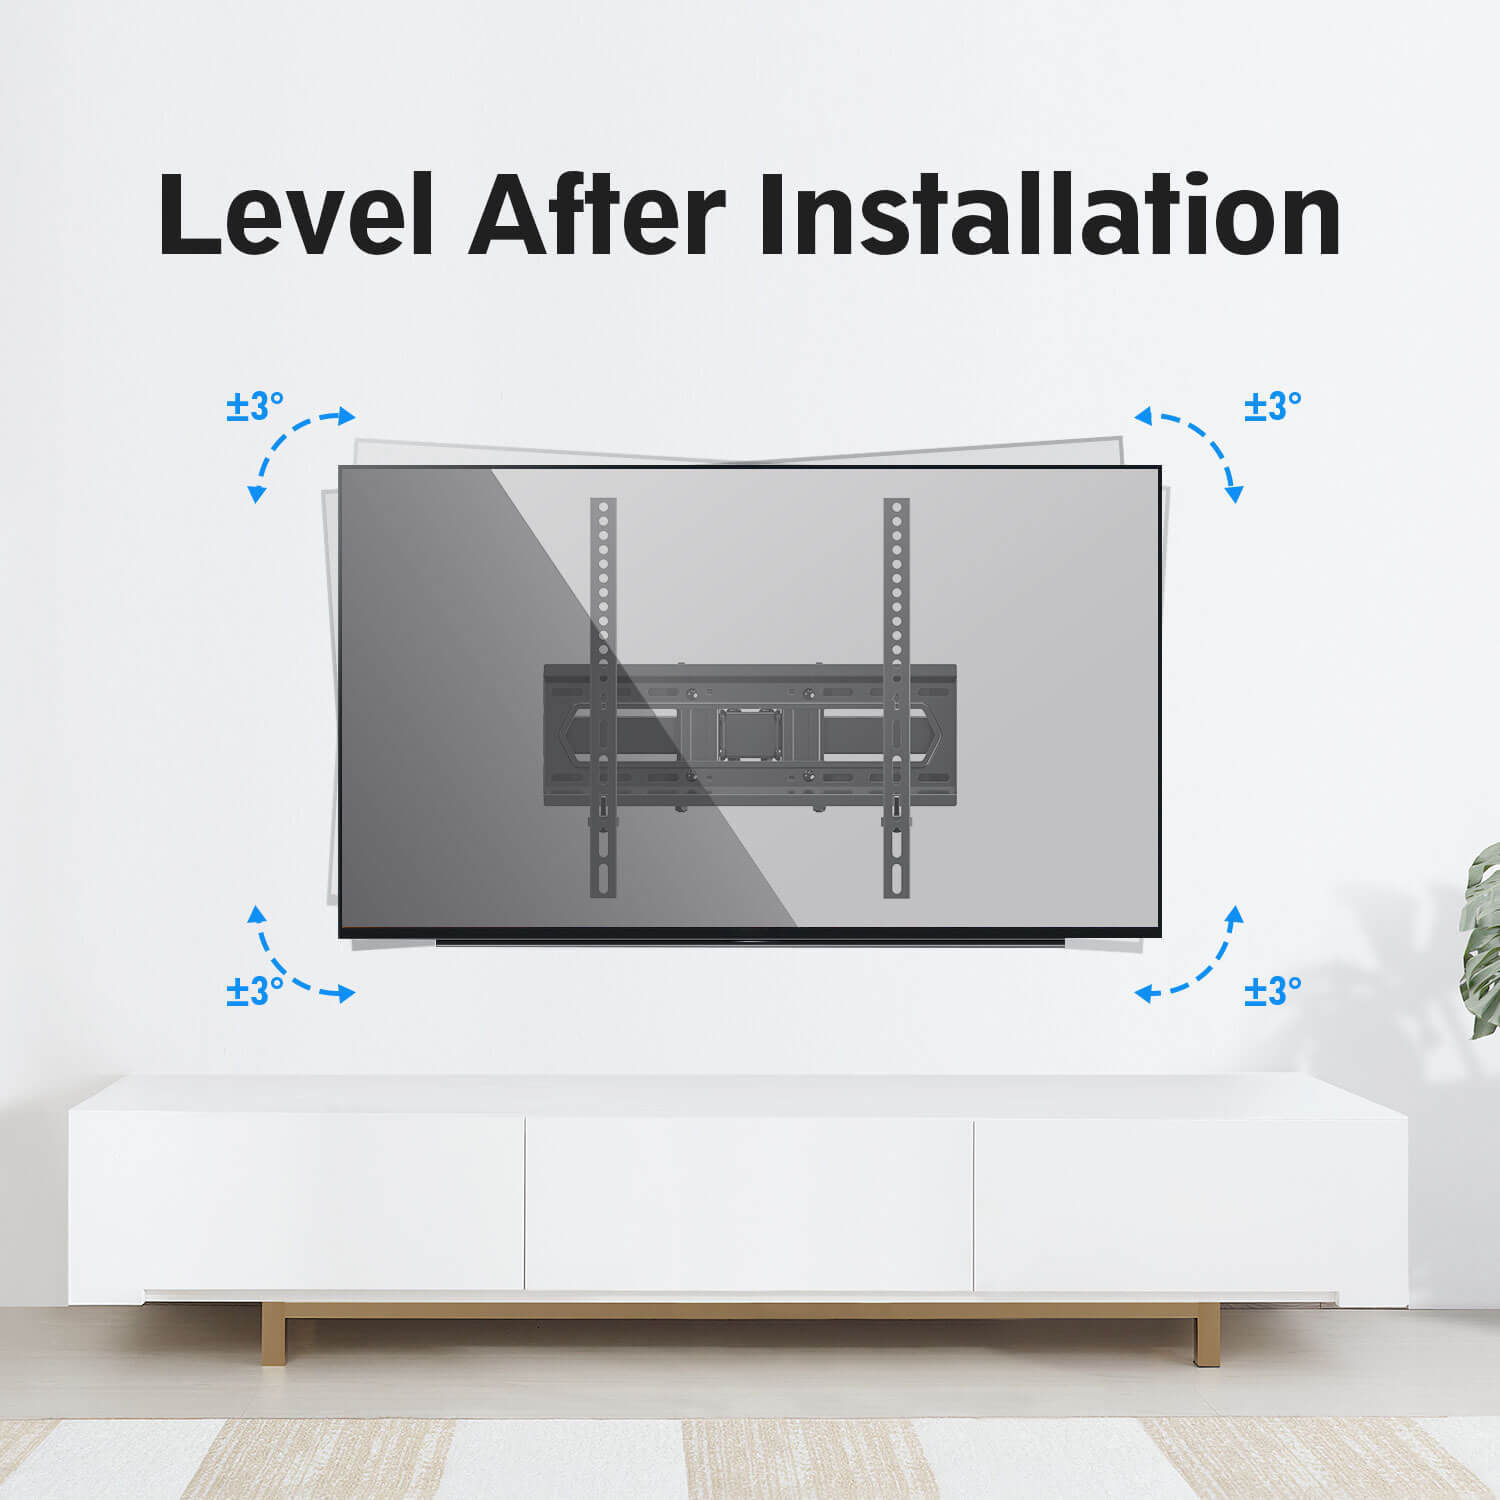 wall mount for TV level after installation